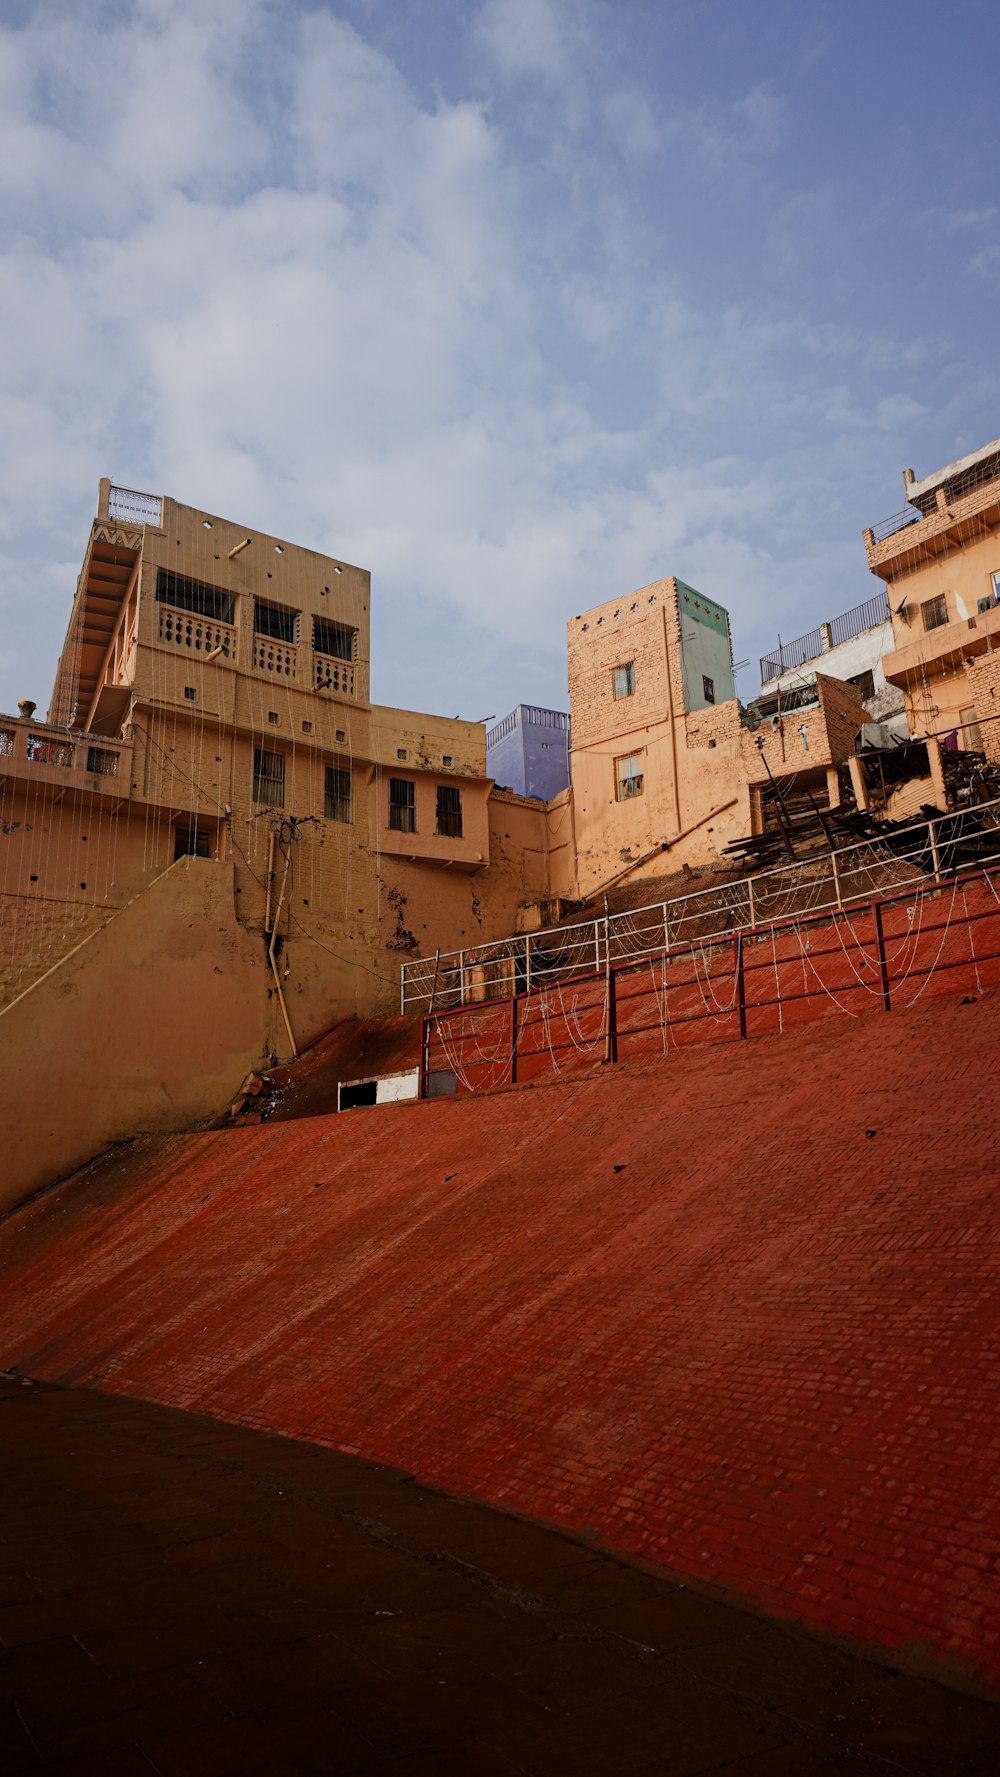 a view of some buildings and a ramp